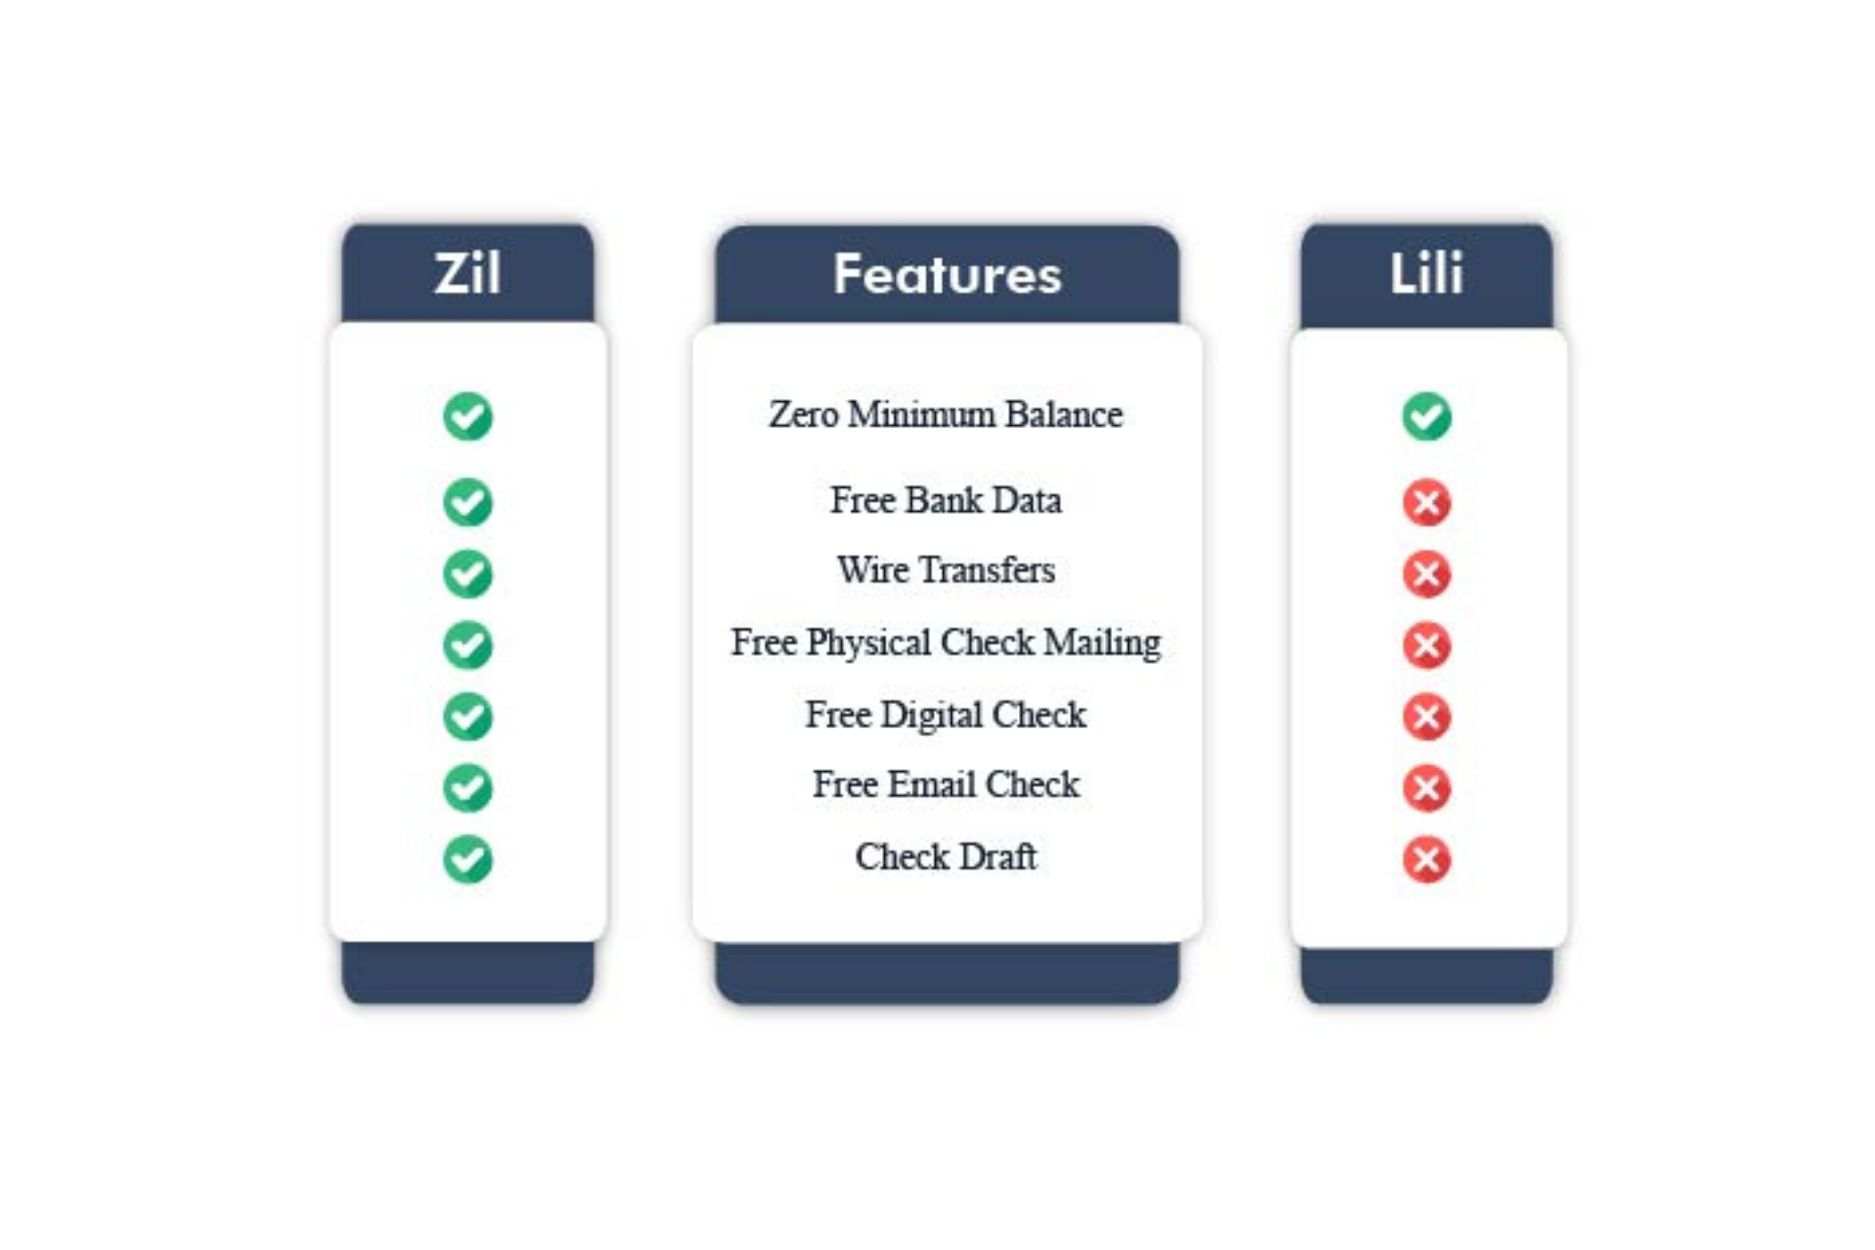 A Table Comparing the Features of the Lili Business Account